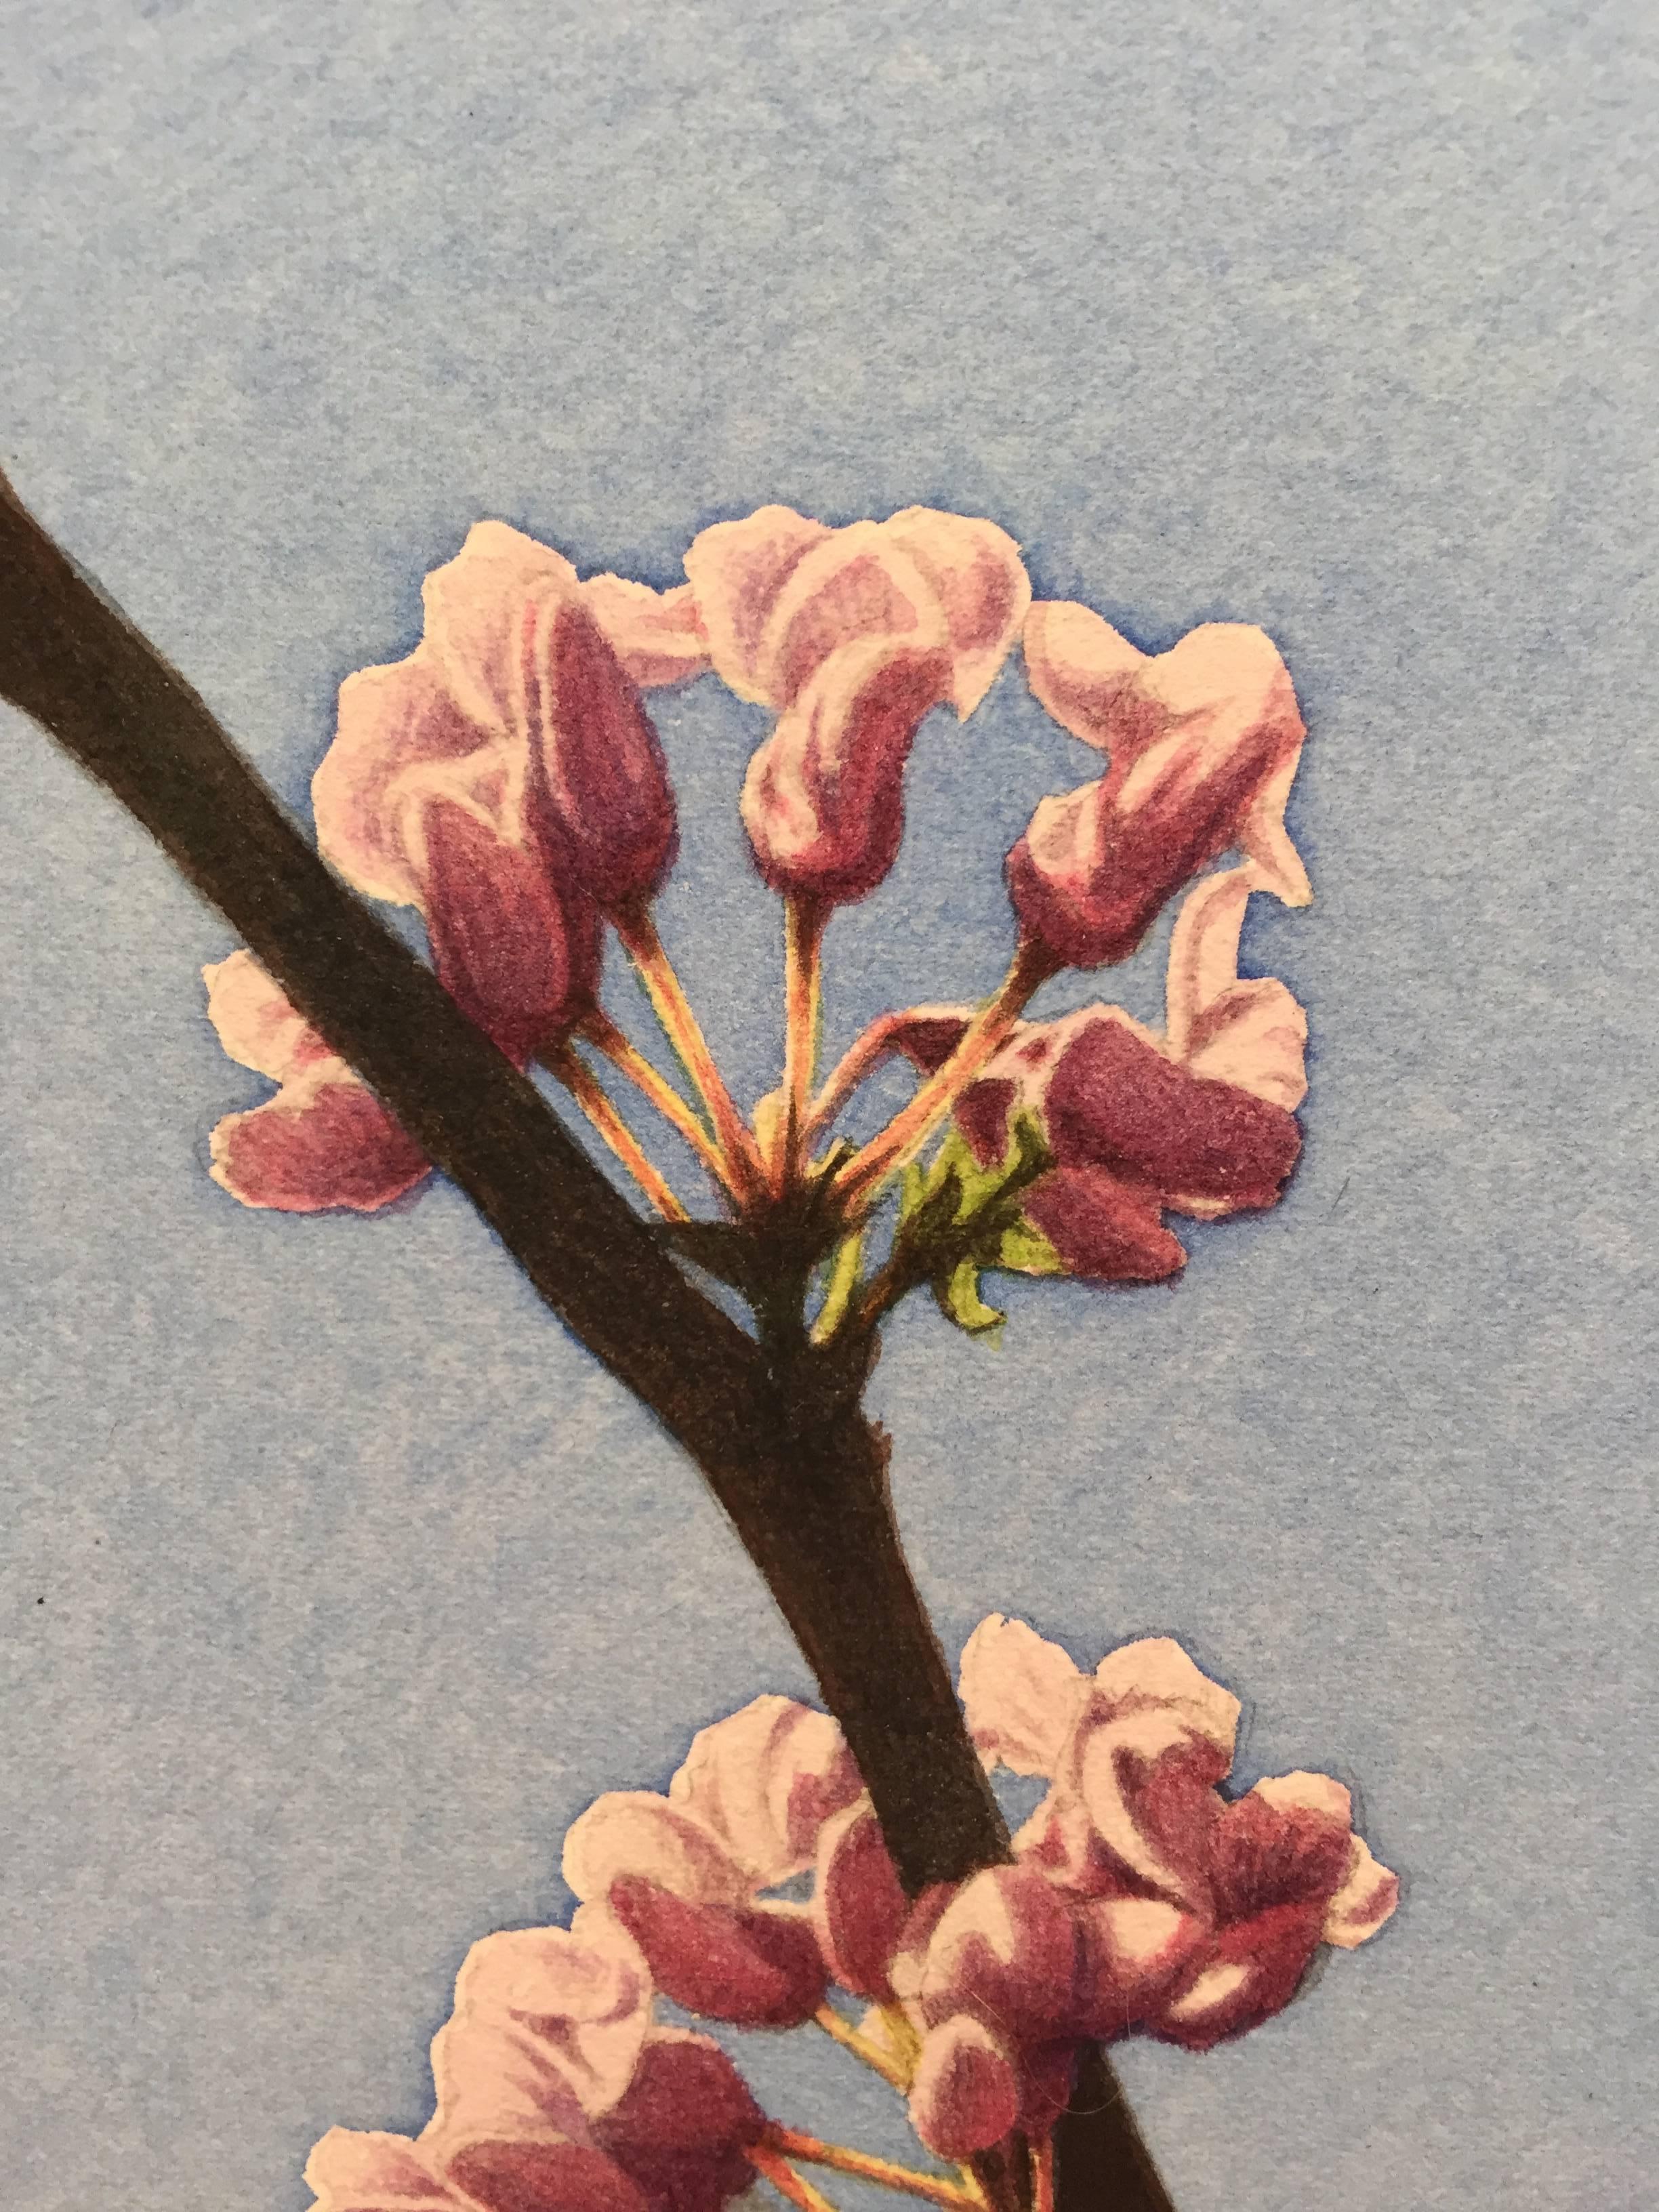 Frederick Brosen, Eastern Redbud, Realist graphite and watercolor painting, 2017 1